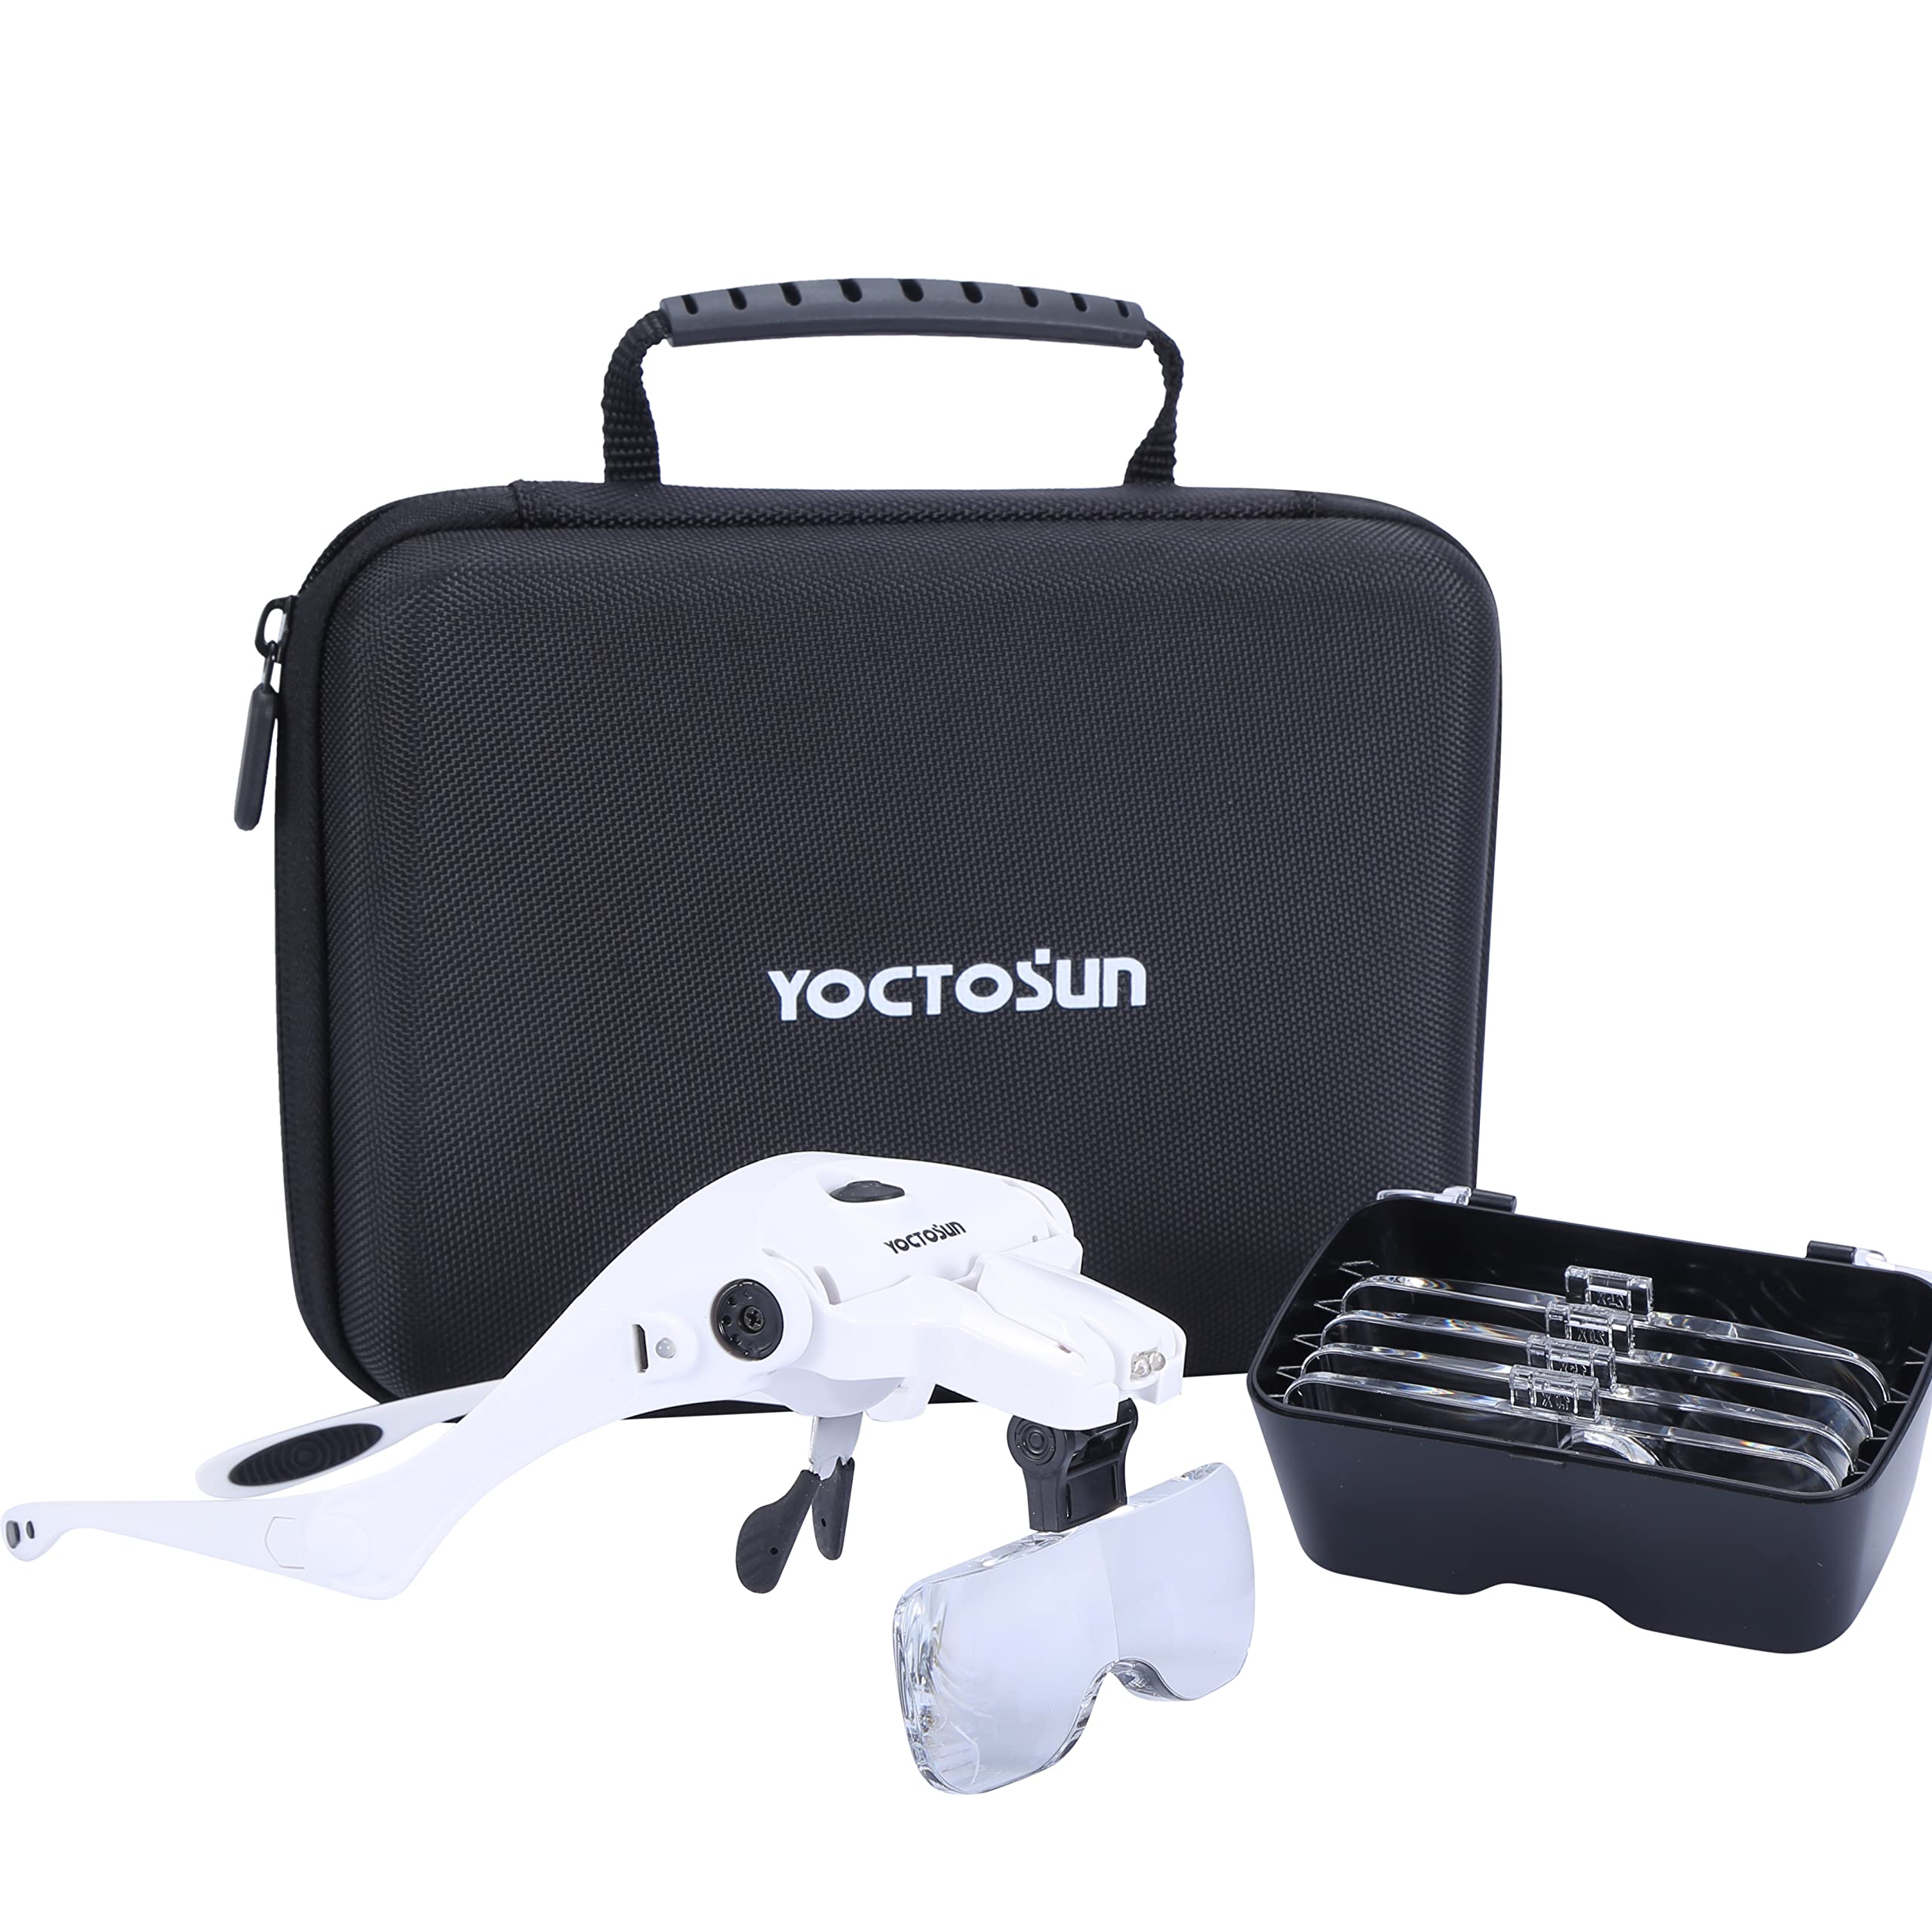 Yoctosun Rechargeable Head Magnifier Glasses, Hands Free Head Mount Magnifier with 3 Detachable Lenses and 2 LED Lights, Great Magnifying Glasses